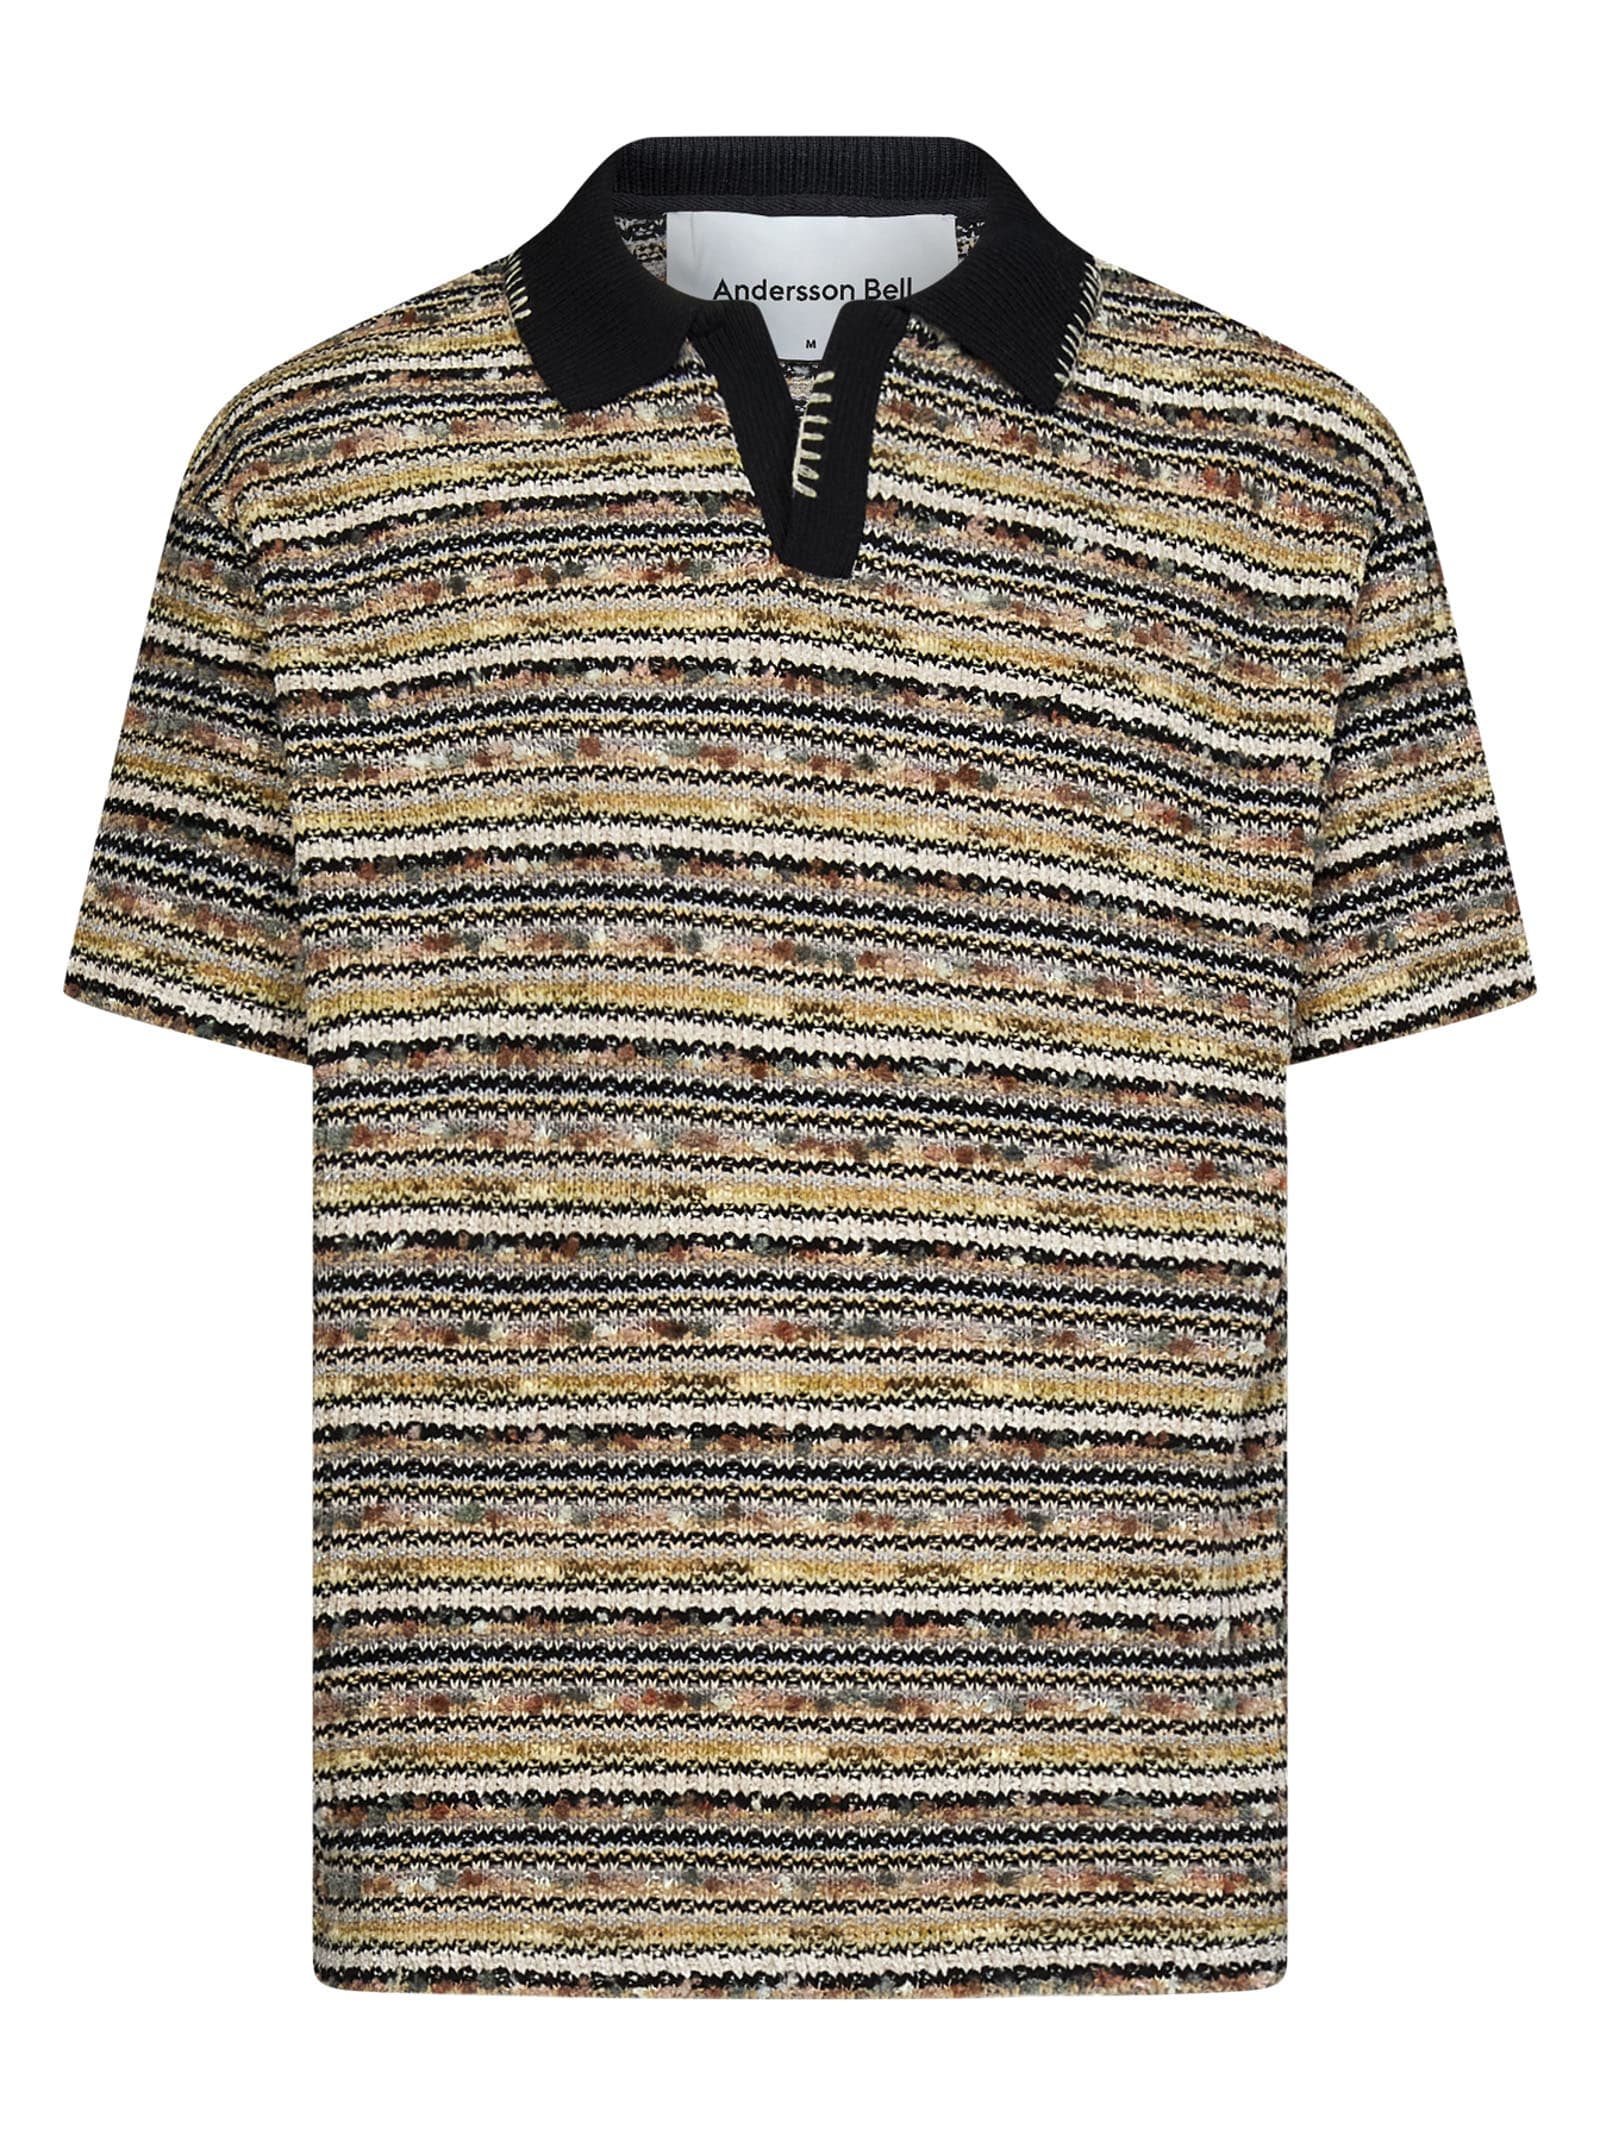 ANDERSSON BELL POLO SHIRT